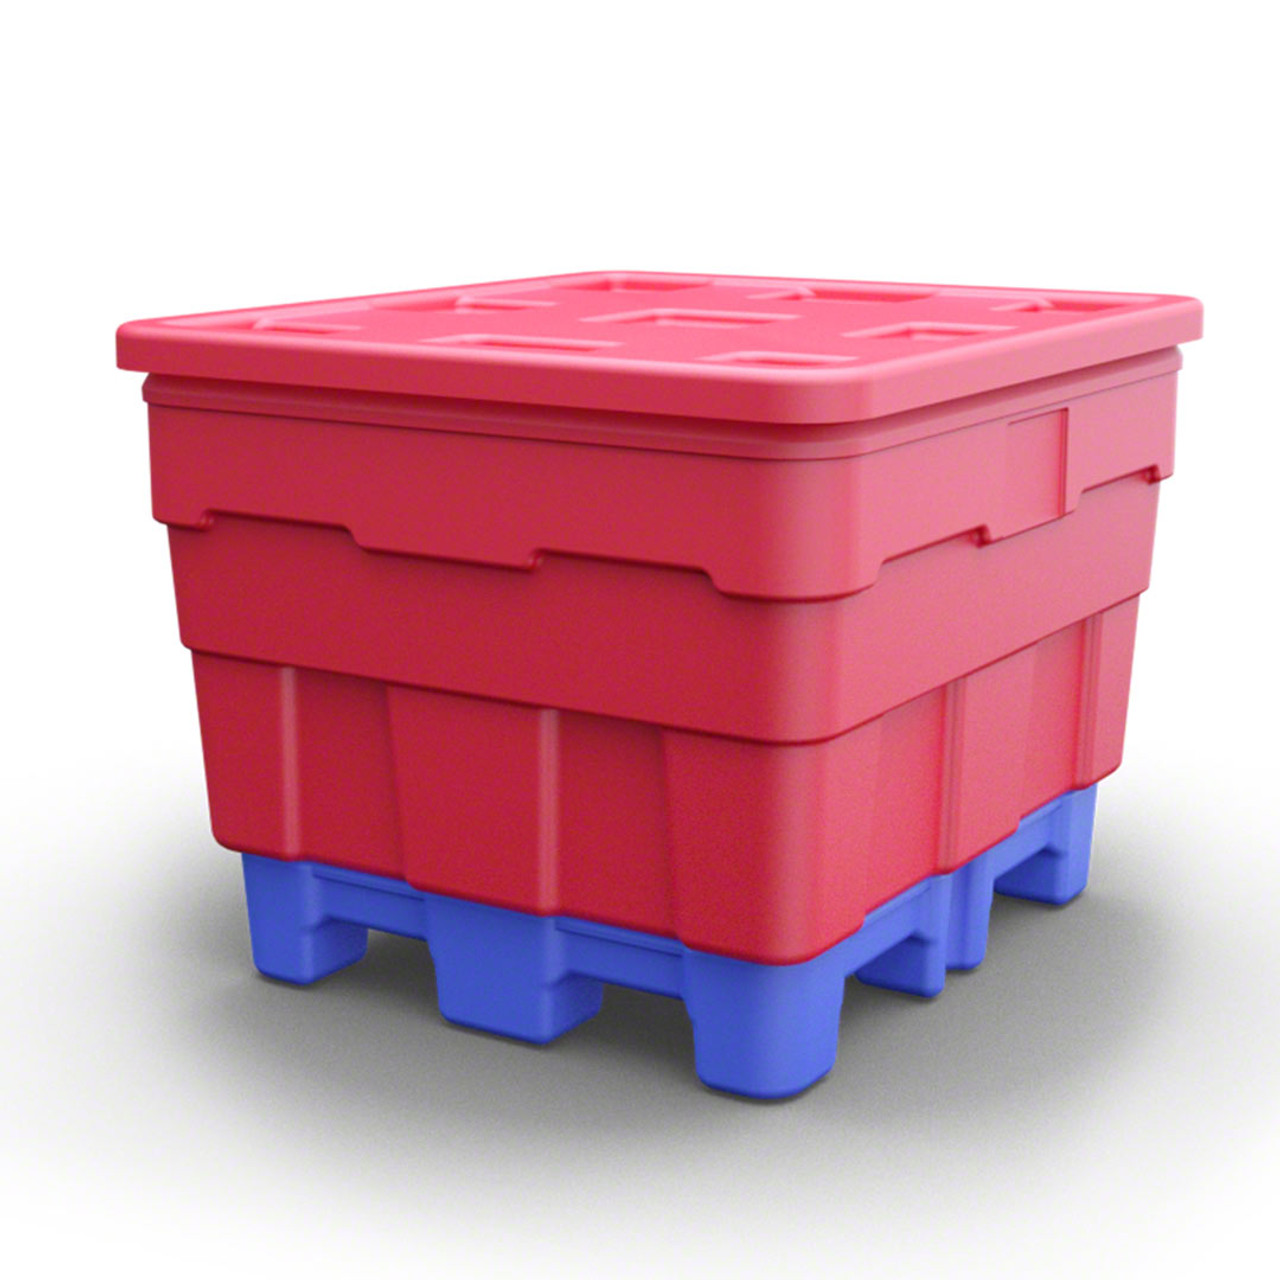 Forklift-friendly bulk containers for easy handling